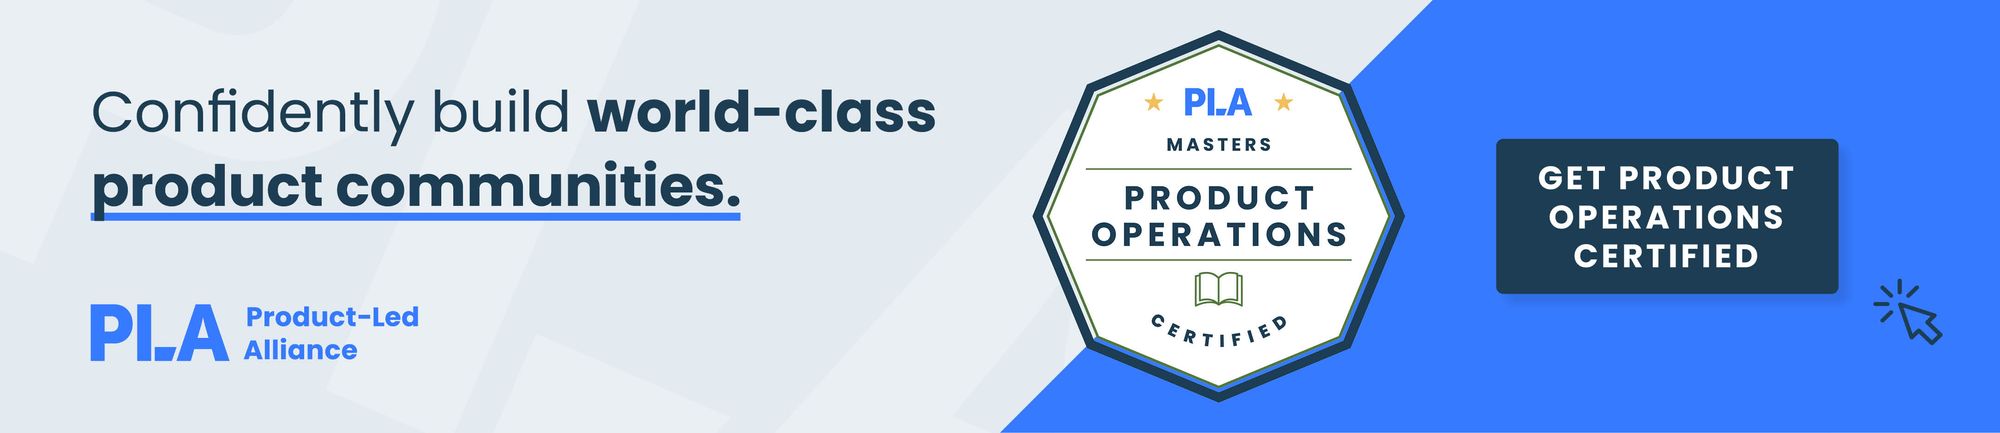 Get Product Operations Certified